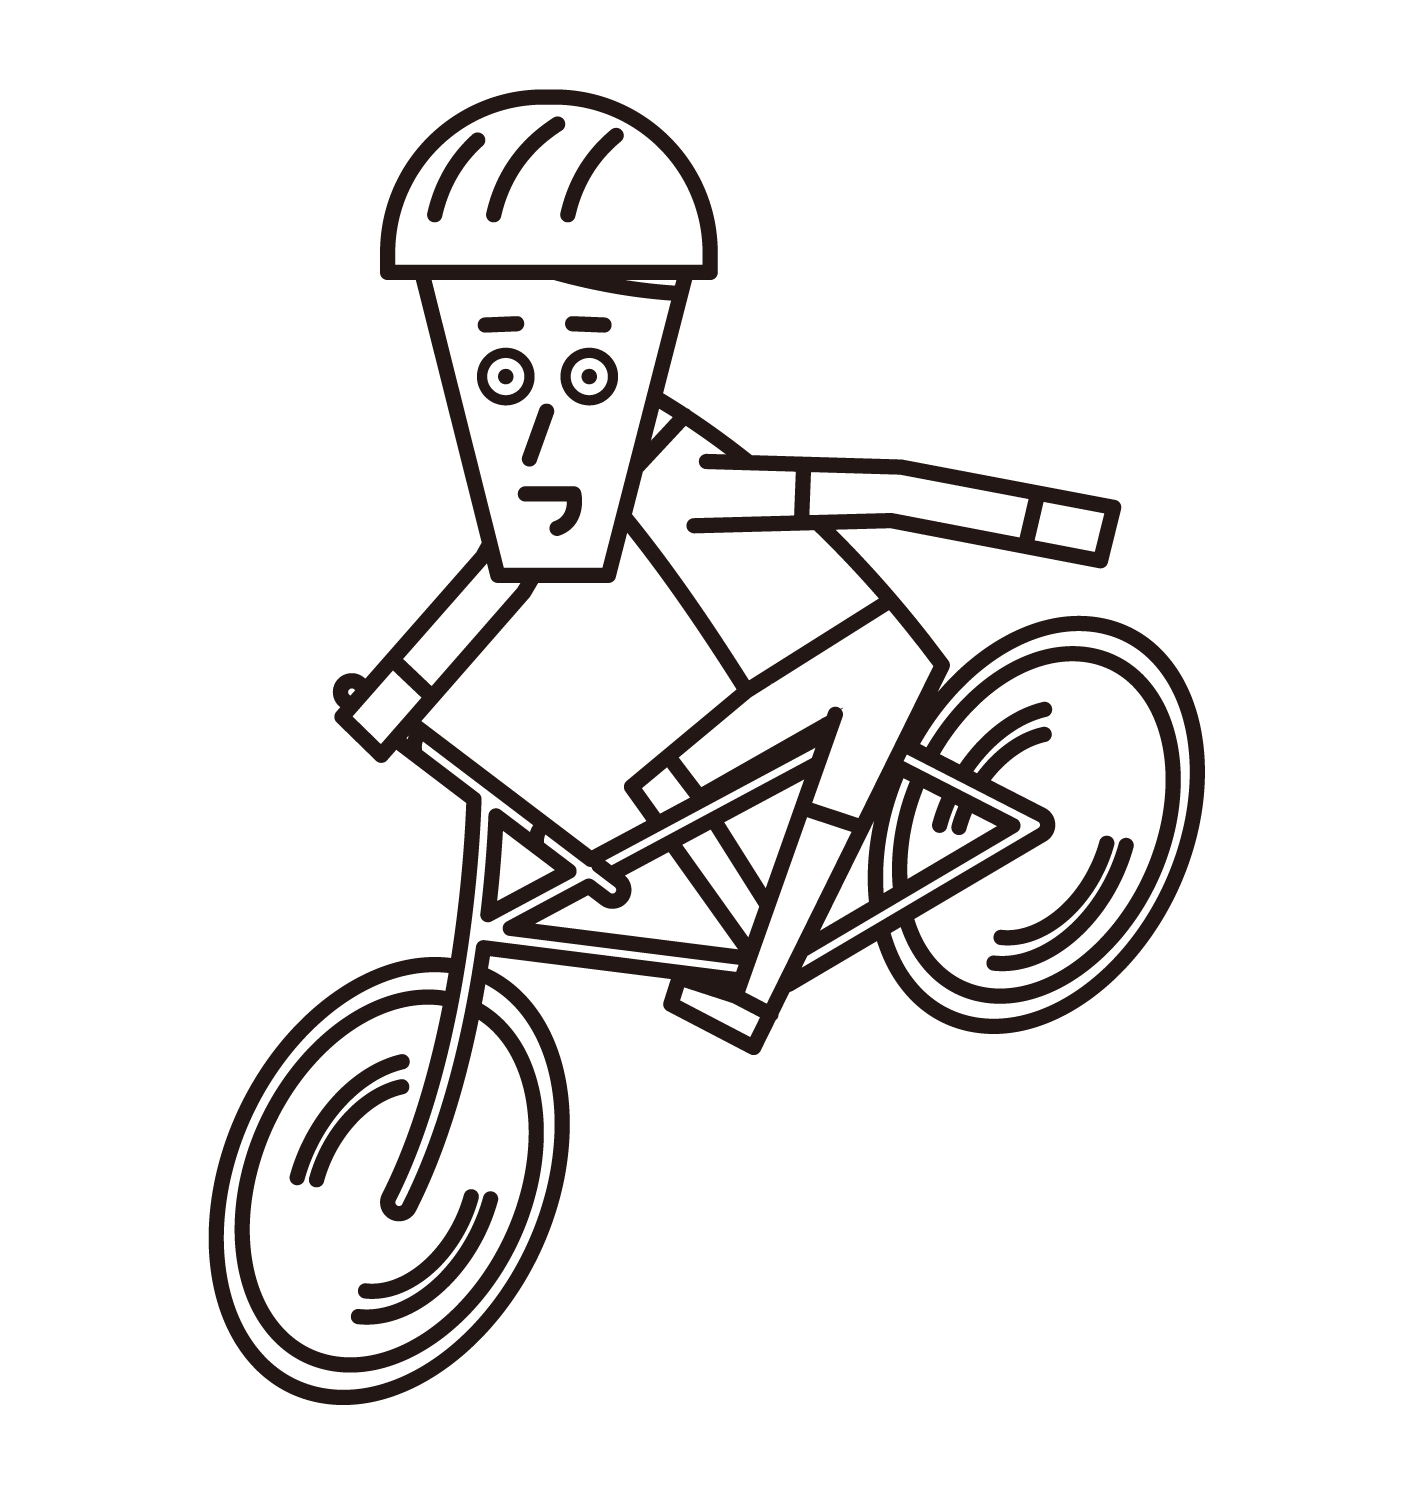 Illustration of a bicycle ride (male) with a hand signal (hand sign)